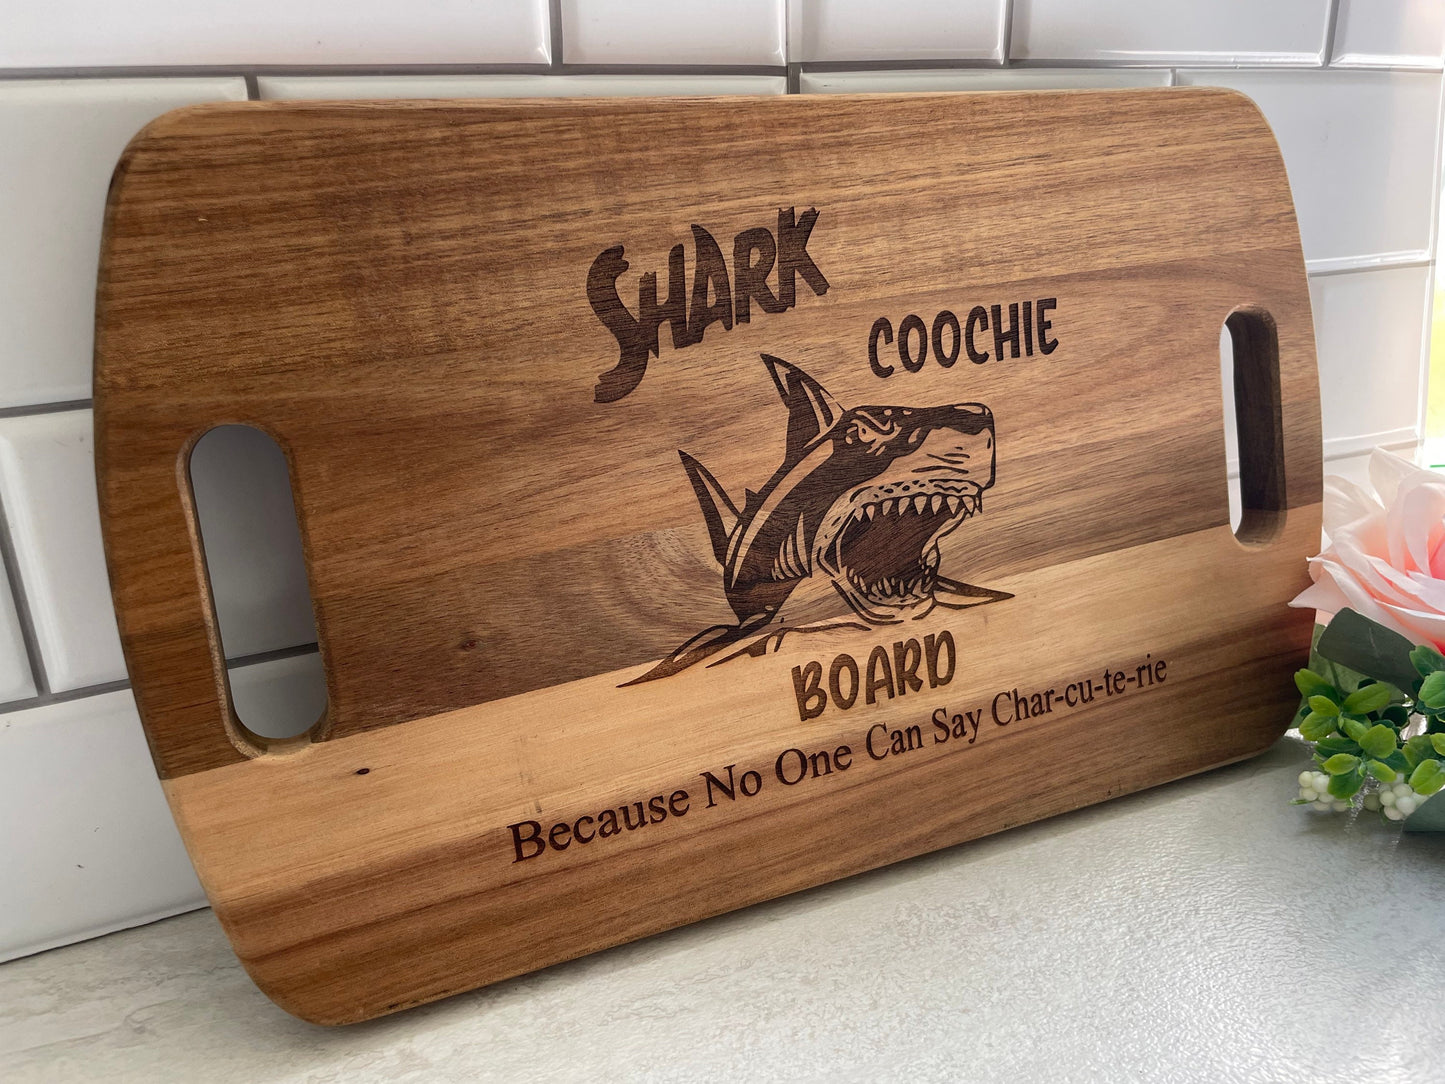 SHARK COOCHIE BOARD, Shark Coochie Charcuterie, White Elephant Gift, Serving Board, Serving Tray, cutting board, gift for him, wedding gift